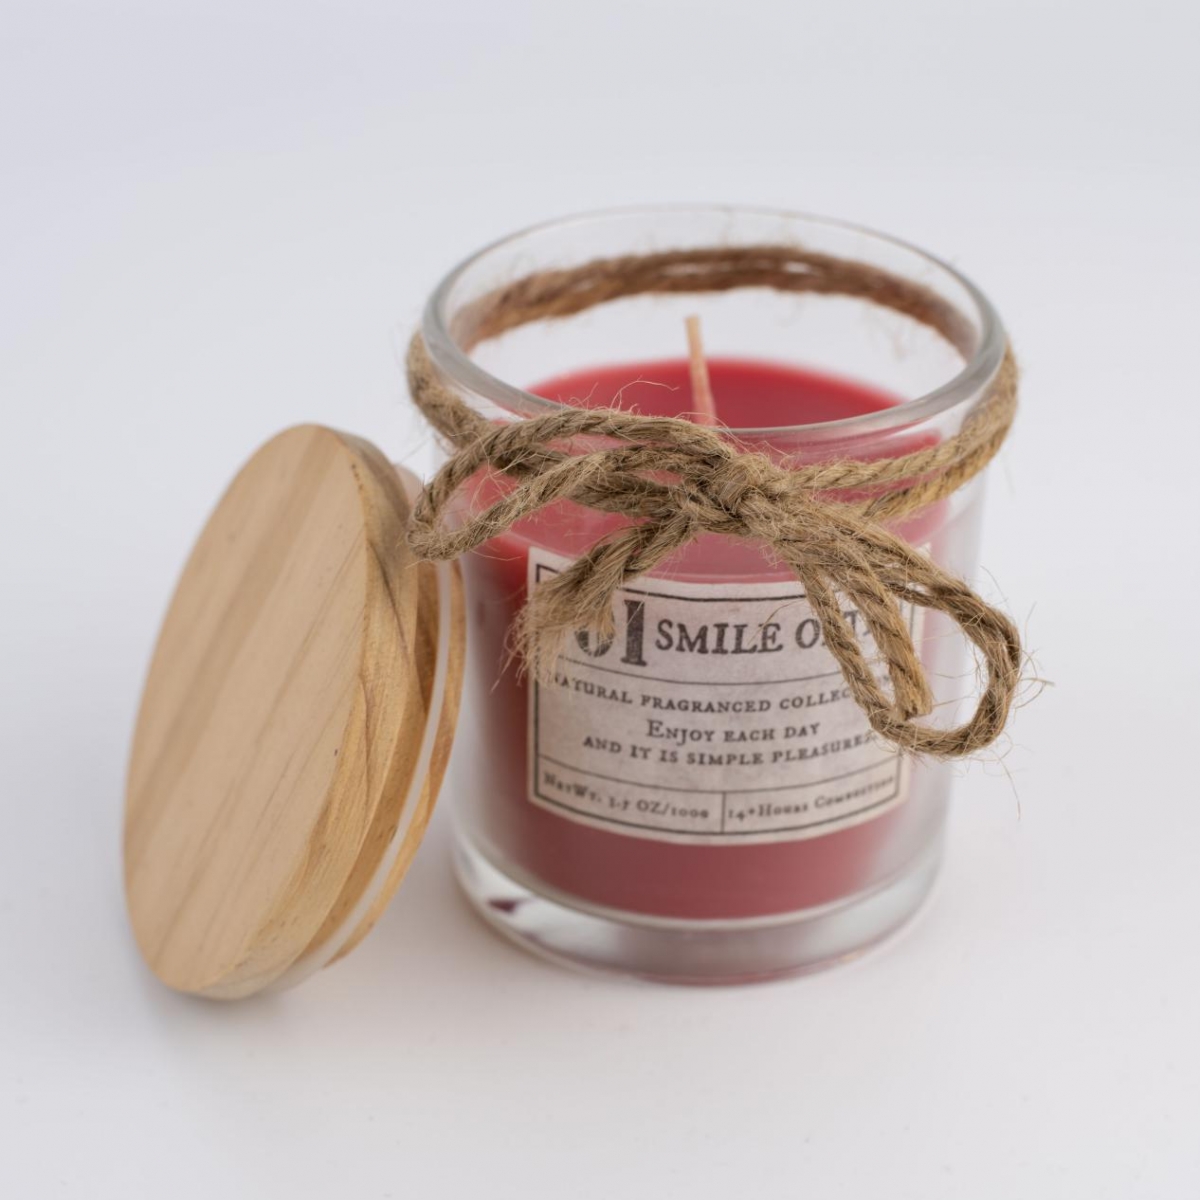 Scented Candles-Soy Candles ,Essential Oil ,Candles In Glass Jar ,Hemp Rope Bow Tie ,Wood Lid ,Private Label  ,China Factory ,Price-HOWCANDLE-Candles,Scented Candles,Aromatherapy Candles,Soy Candles,Vegan Candles,Jar Candles,Pillar Candles,Candle Gift Sets,Essential Oils,Reed Diffuser,Candle Holder,